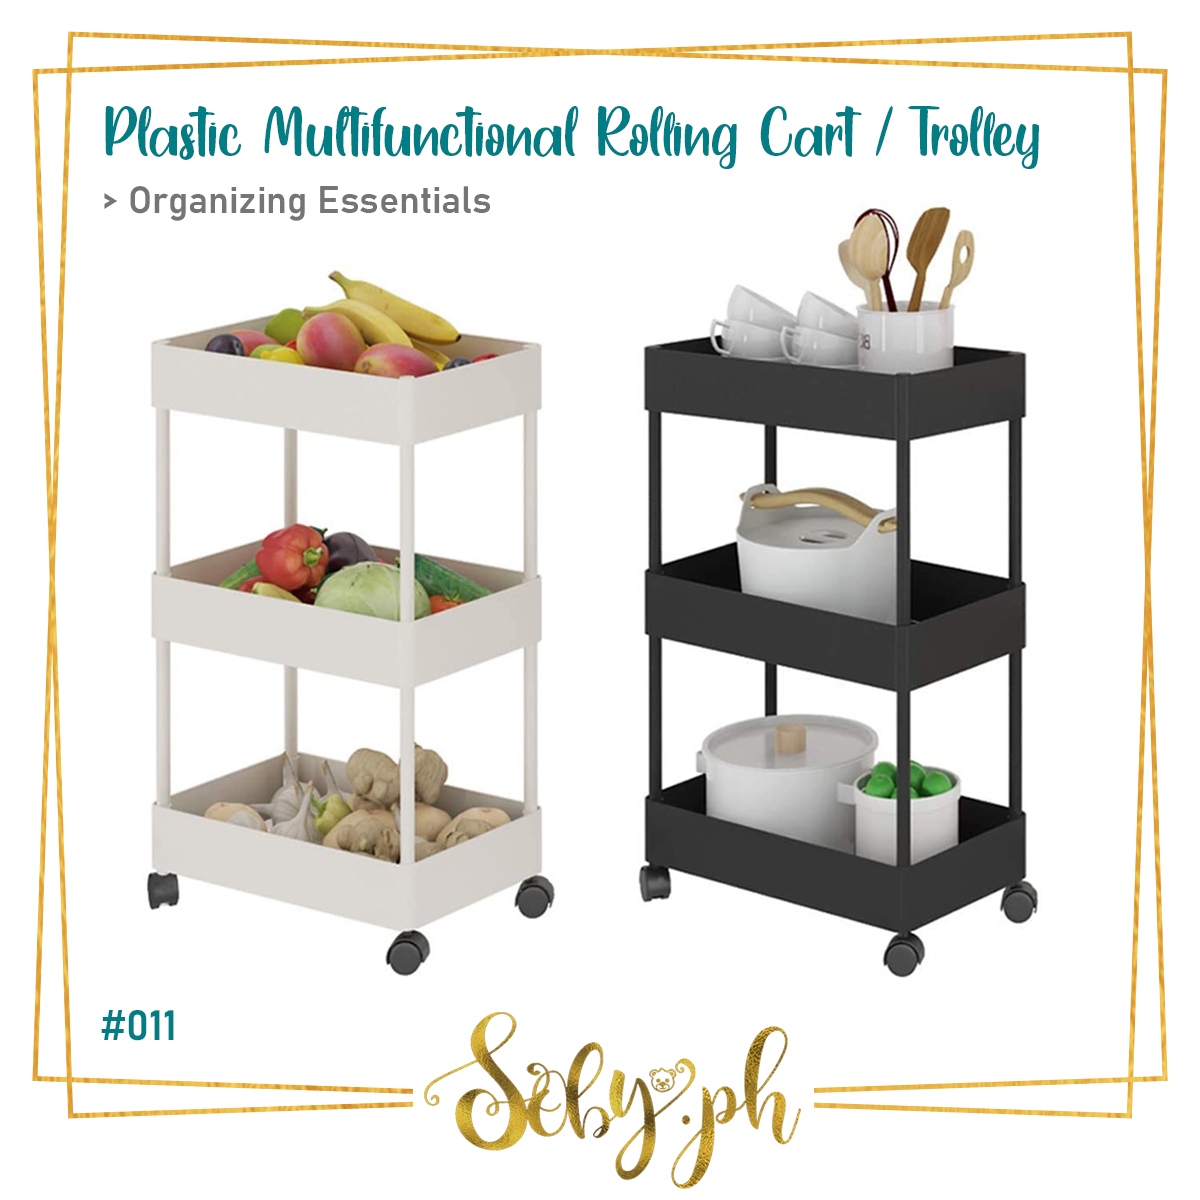 Rolling Metal Trolley Cart Mobile Utility Carts with 4 Steel Wire Shelves and Easy Glide Caster Wheels Slide Out Mesh Storage Cart Storage Tower Rack Storage Shelves for Home Kitchen Bathroom Storage